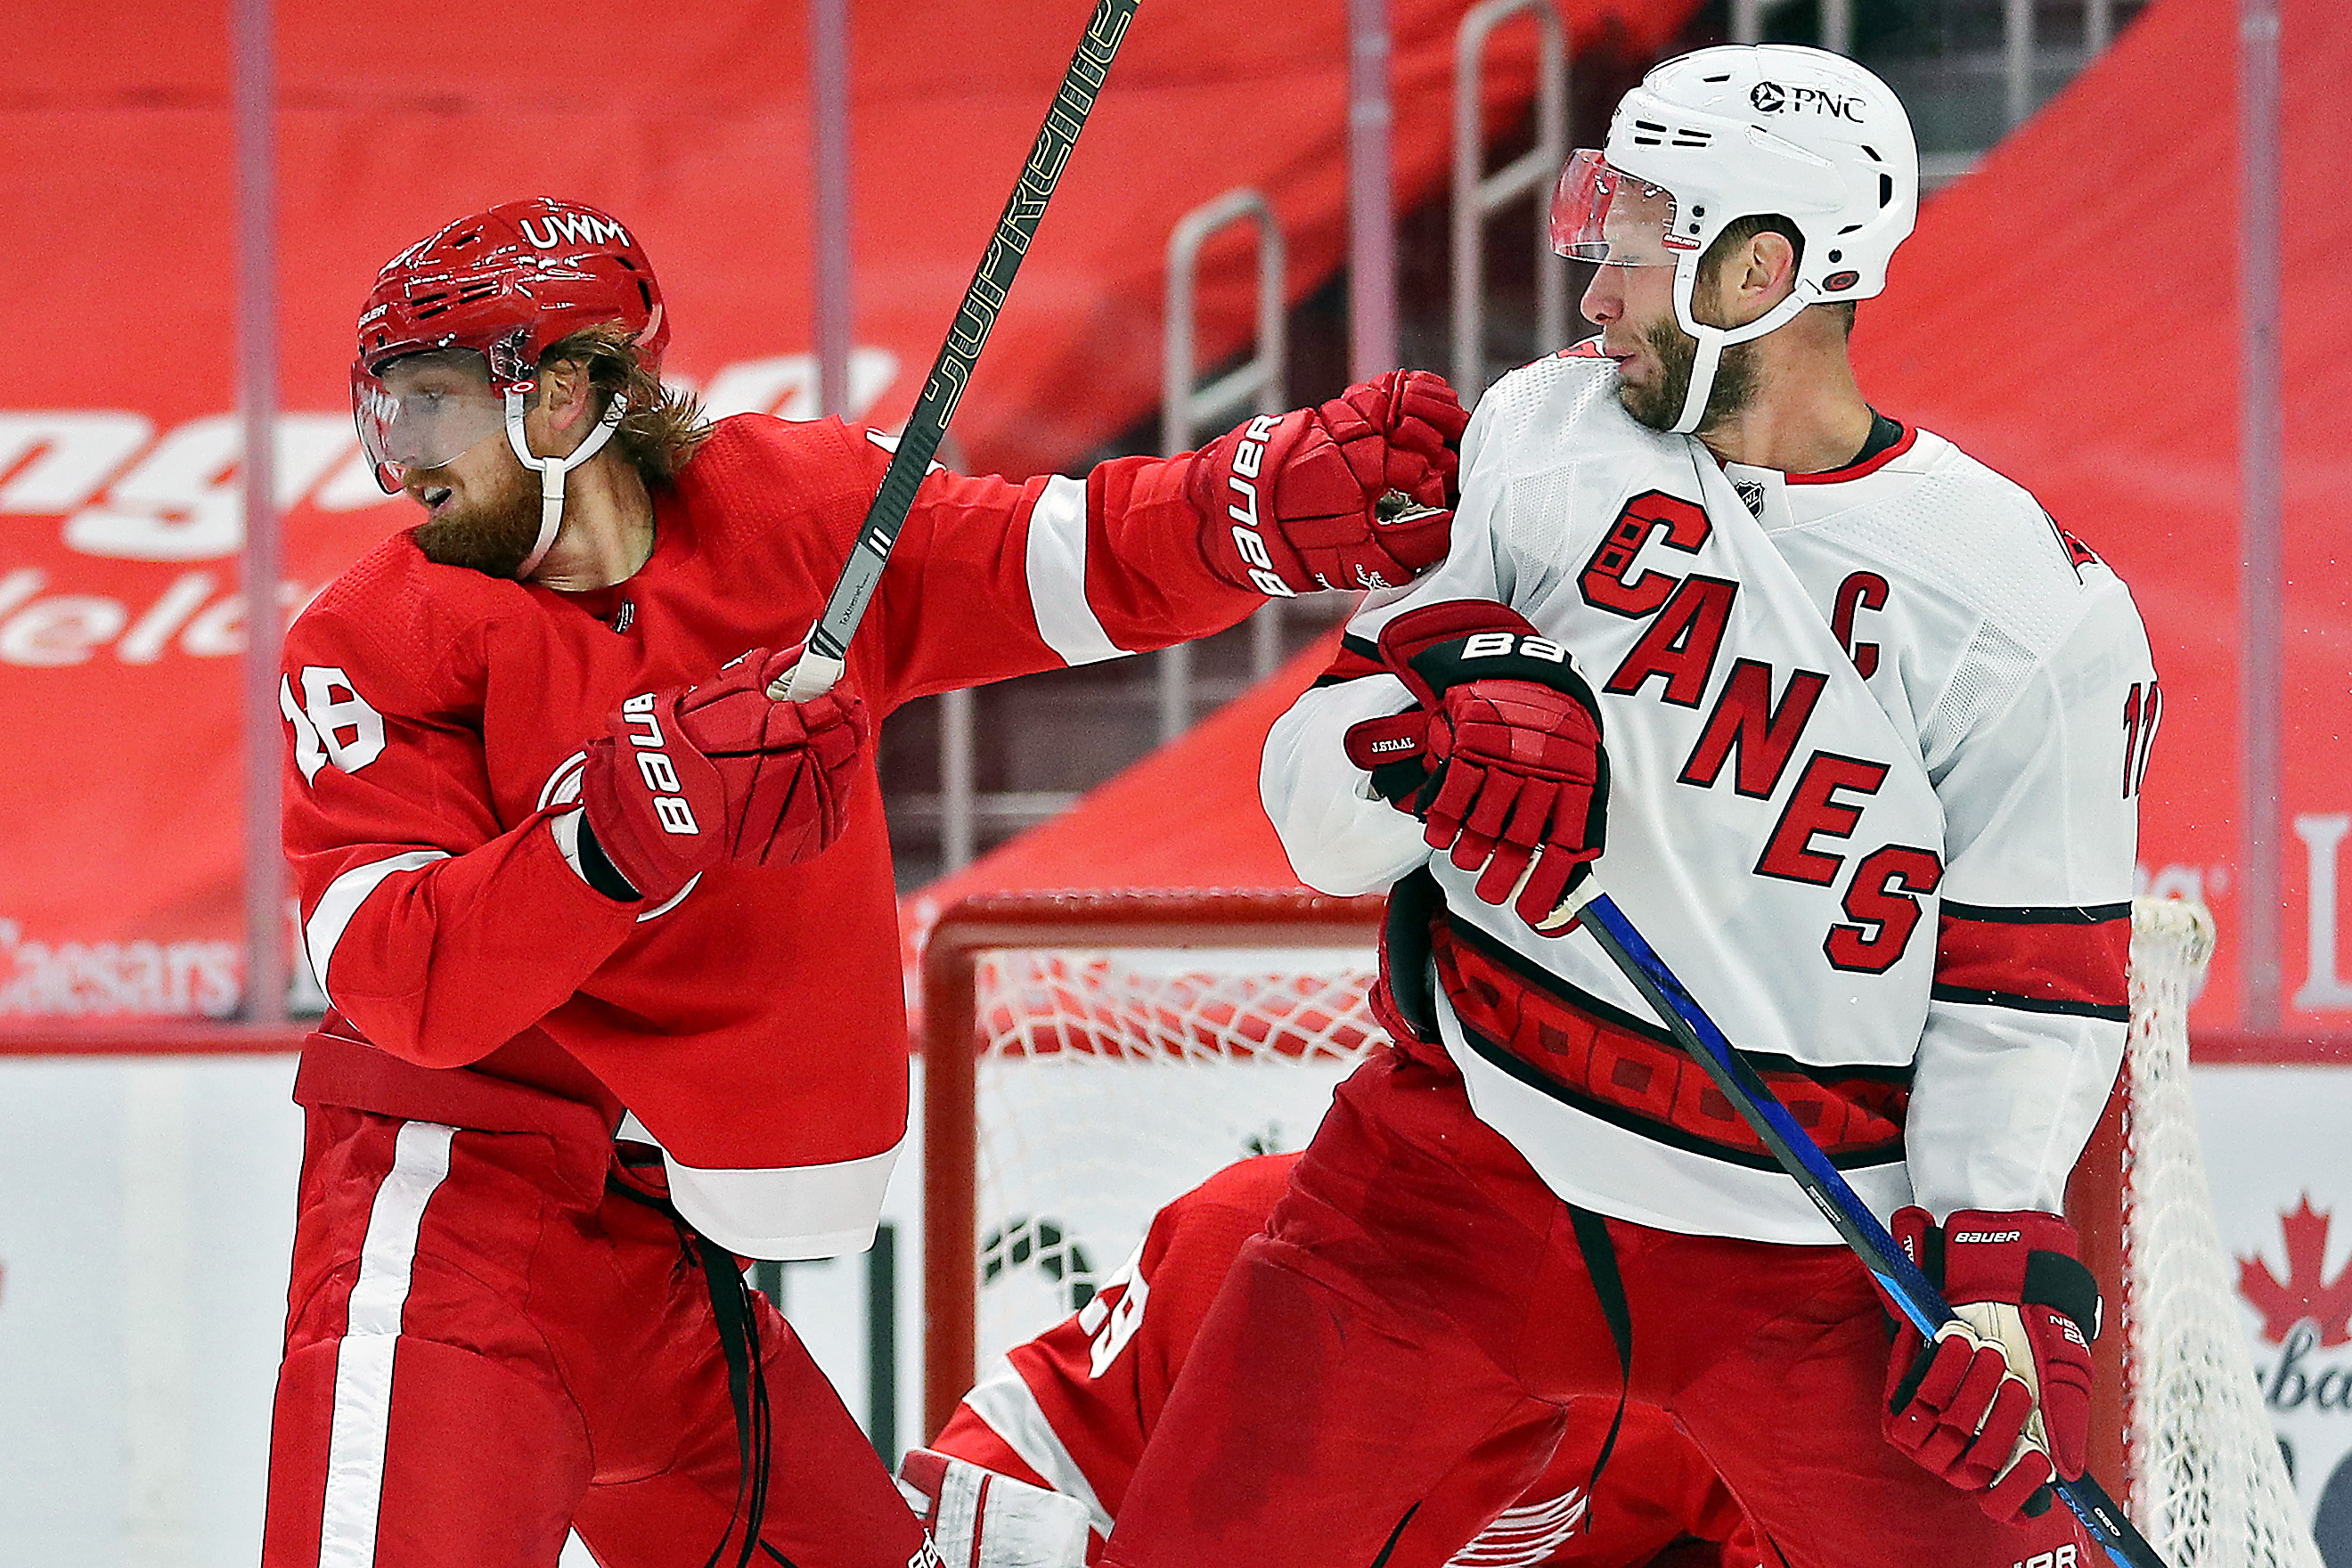 PHOTO: Brothers Eric, Jordan, Jared Staal start game together 